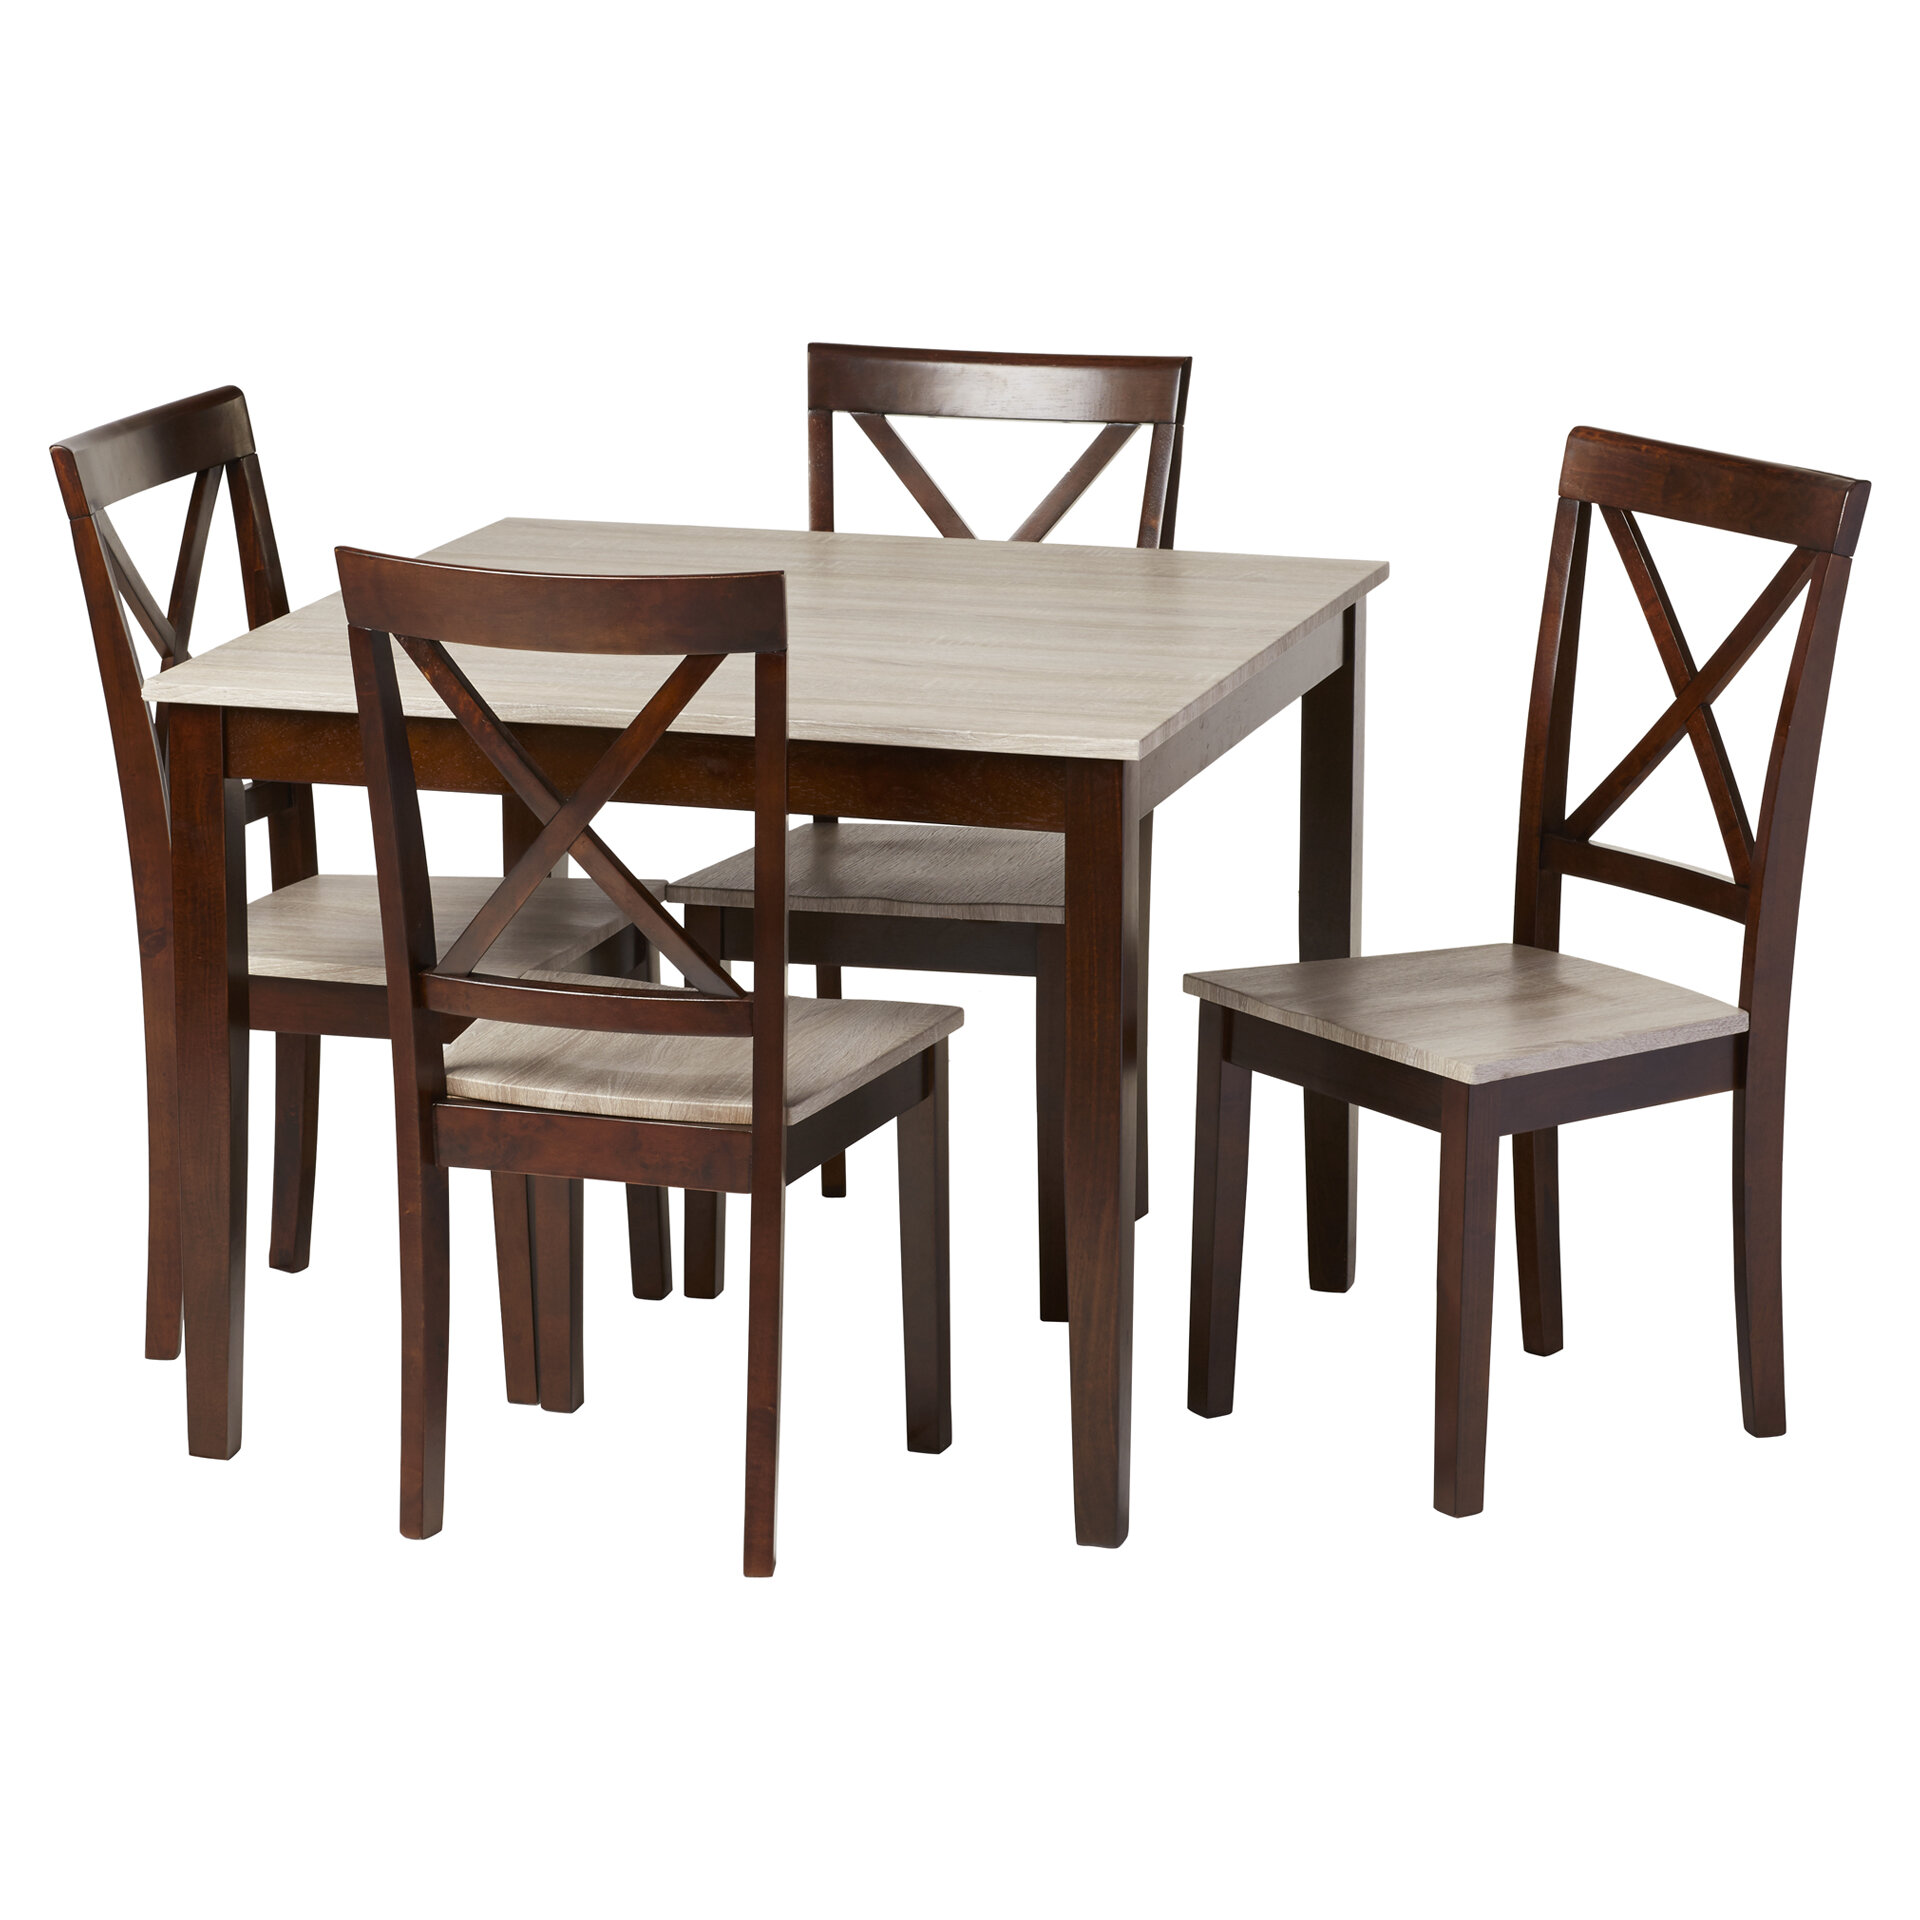 Kitchen Dining Room Sets Free Shipping Over 35 Wayfair